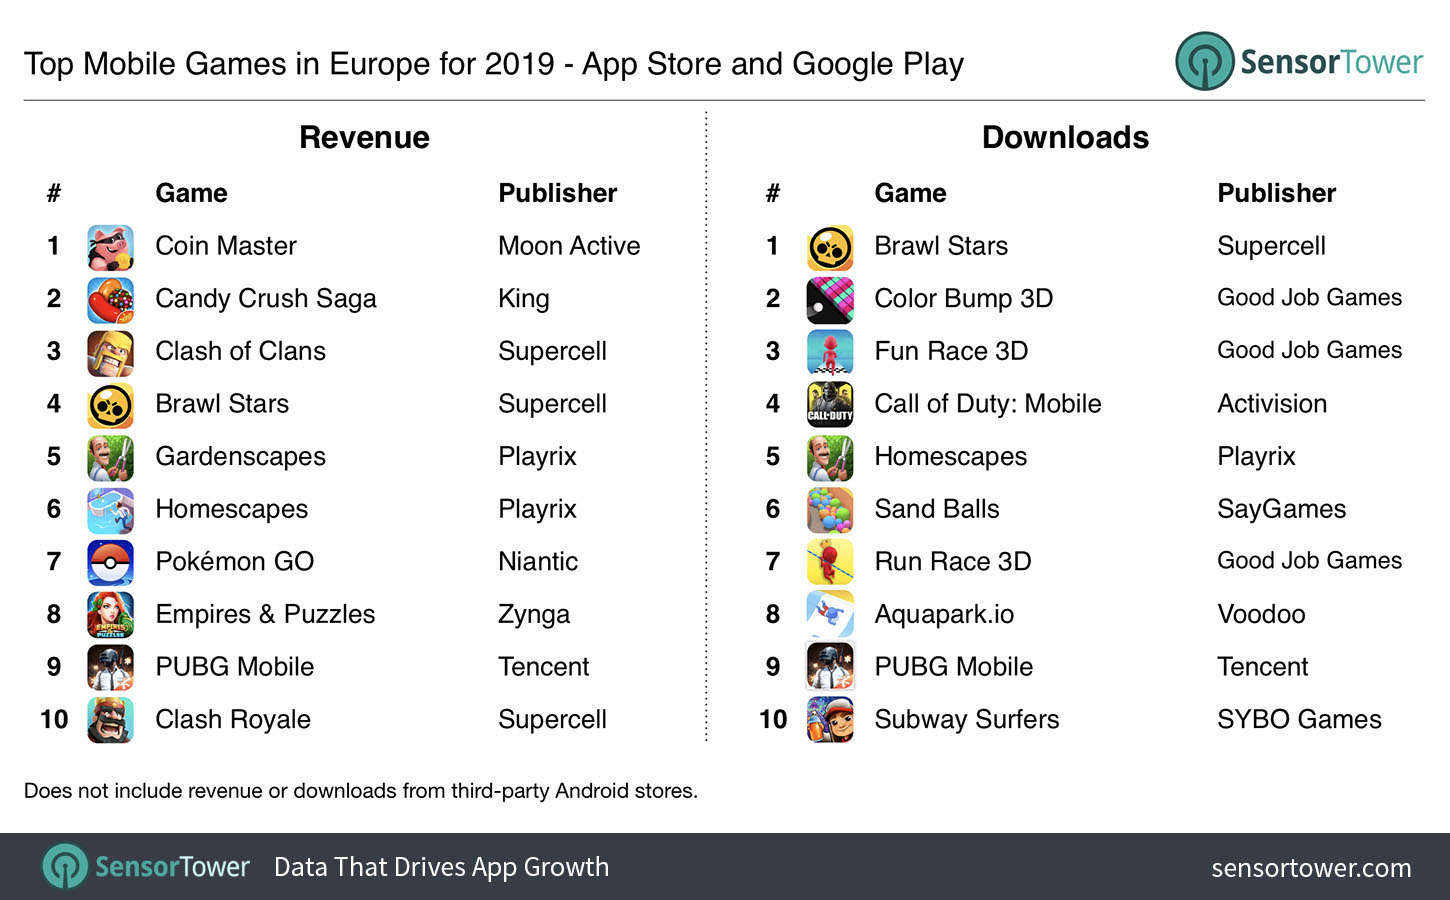 The top mobile games in Europe in 2019 by revenue and downloads